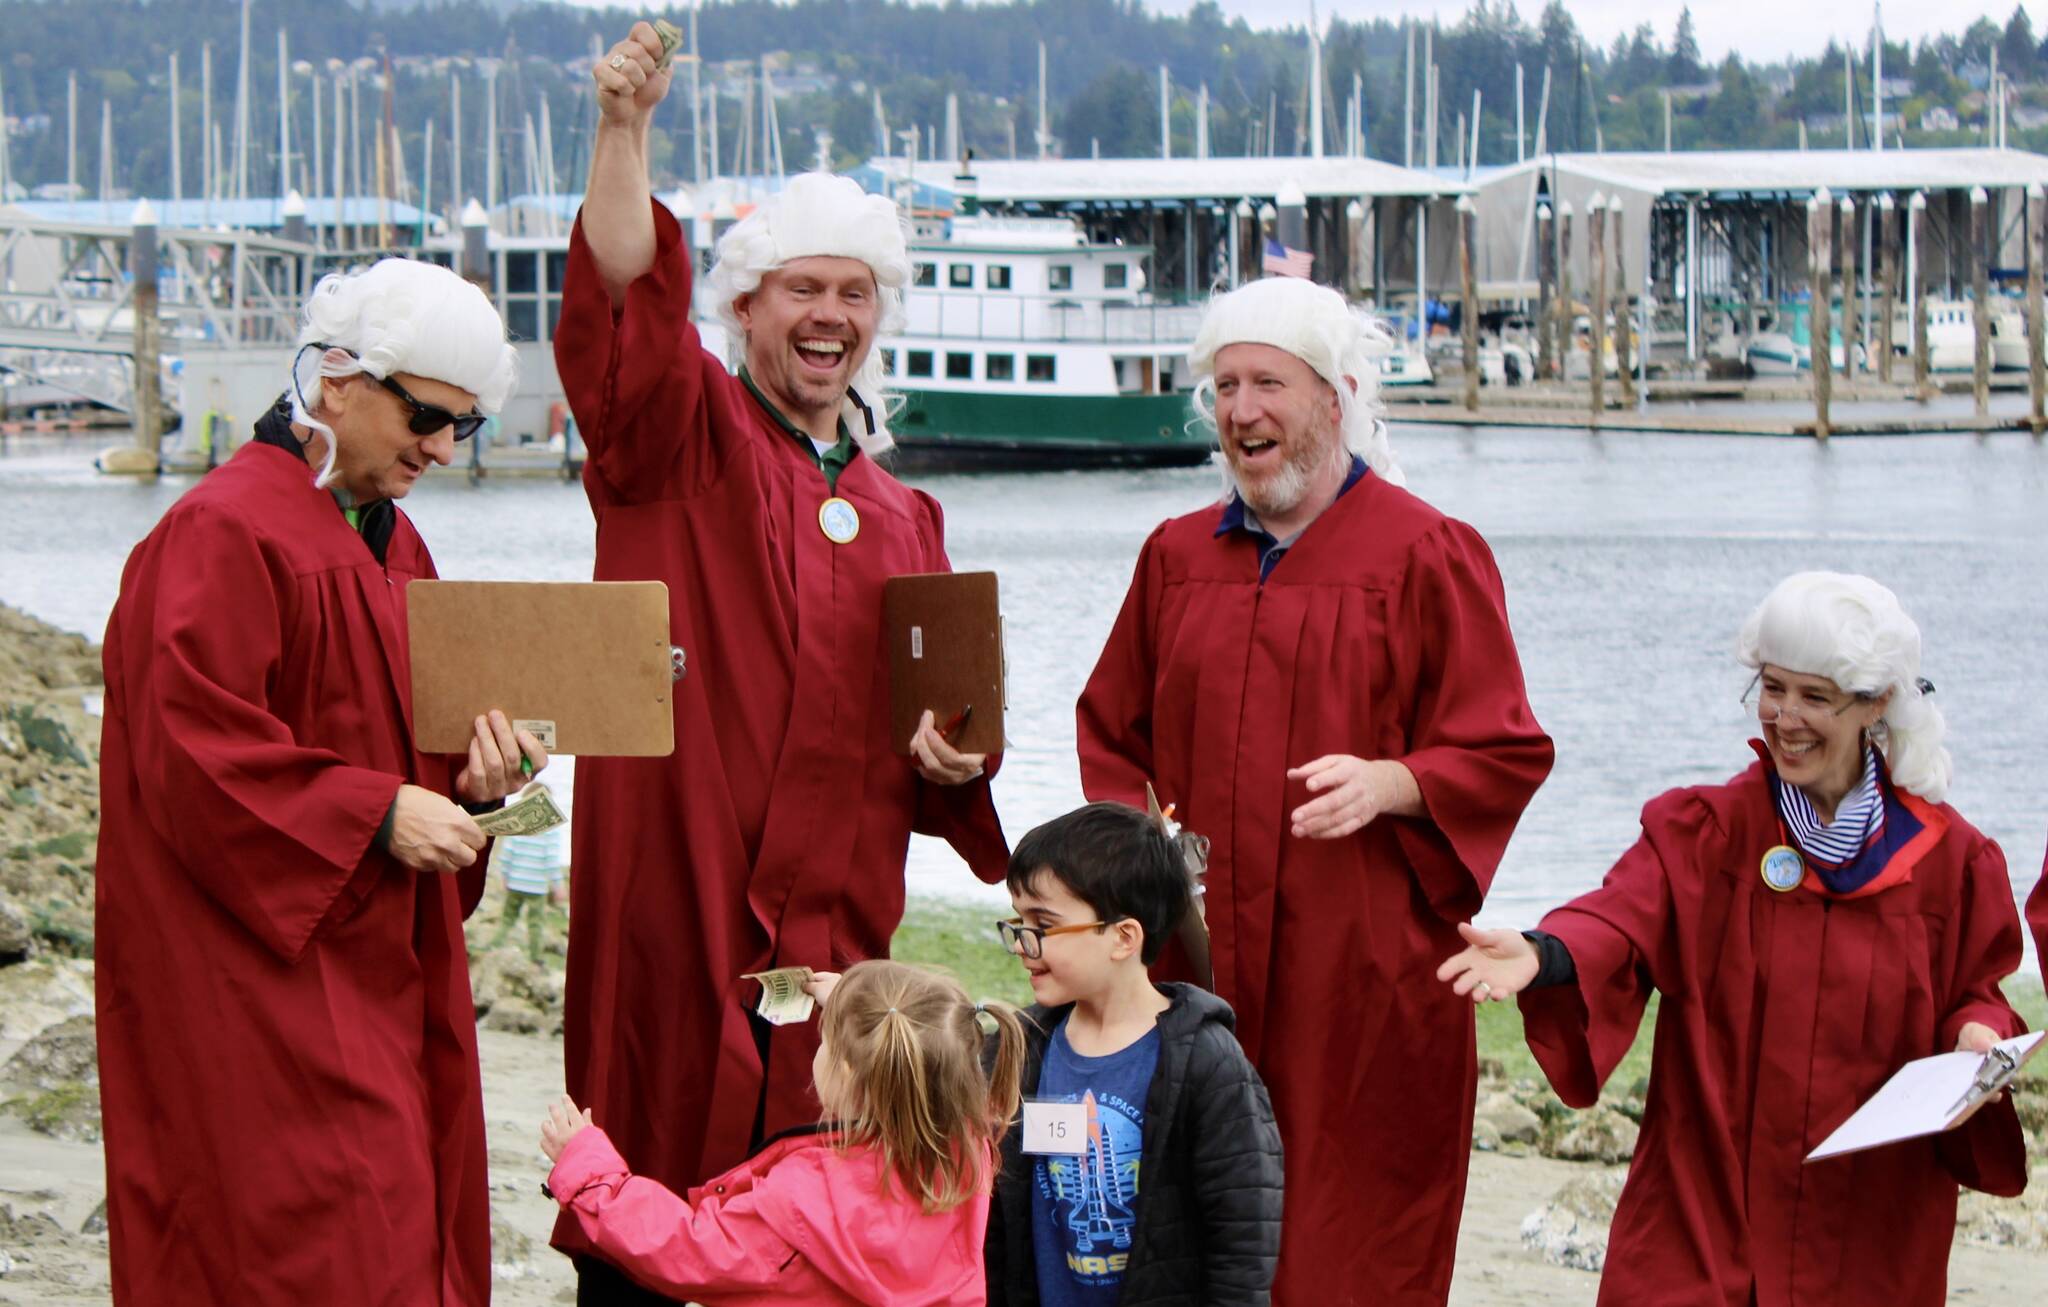 Elisha Meyer/Kitsap News Group photos
These kids boost their chances of winning the 33rd annual Seagull Calling Contest, passing off some green to the judges.